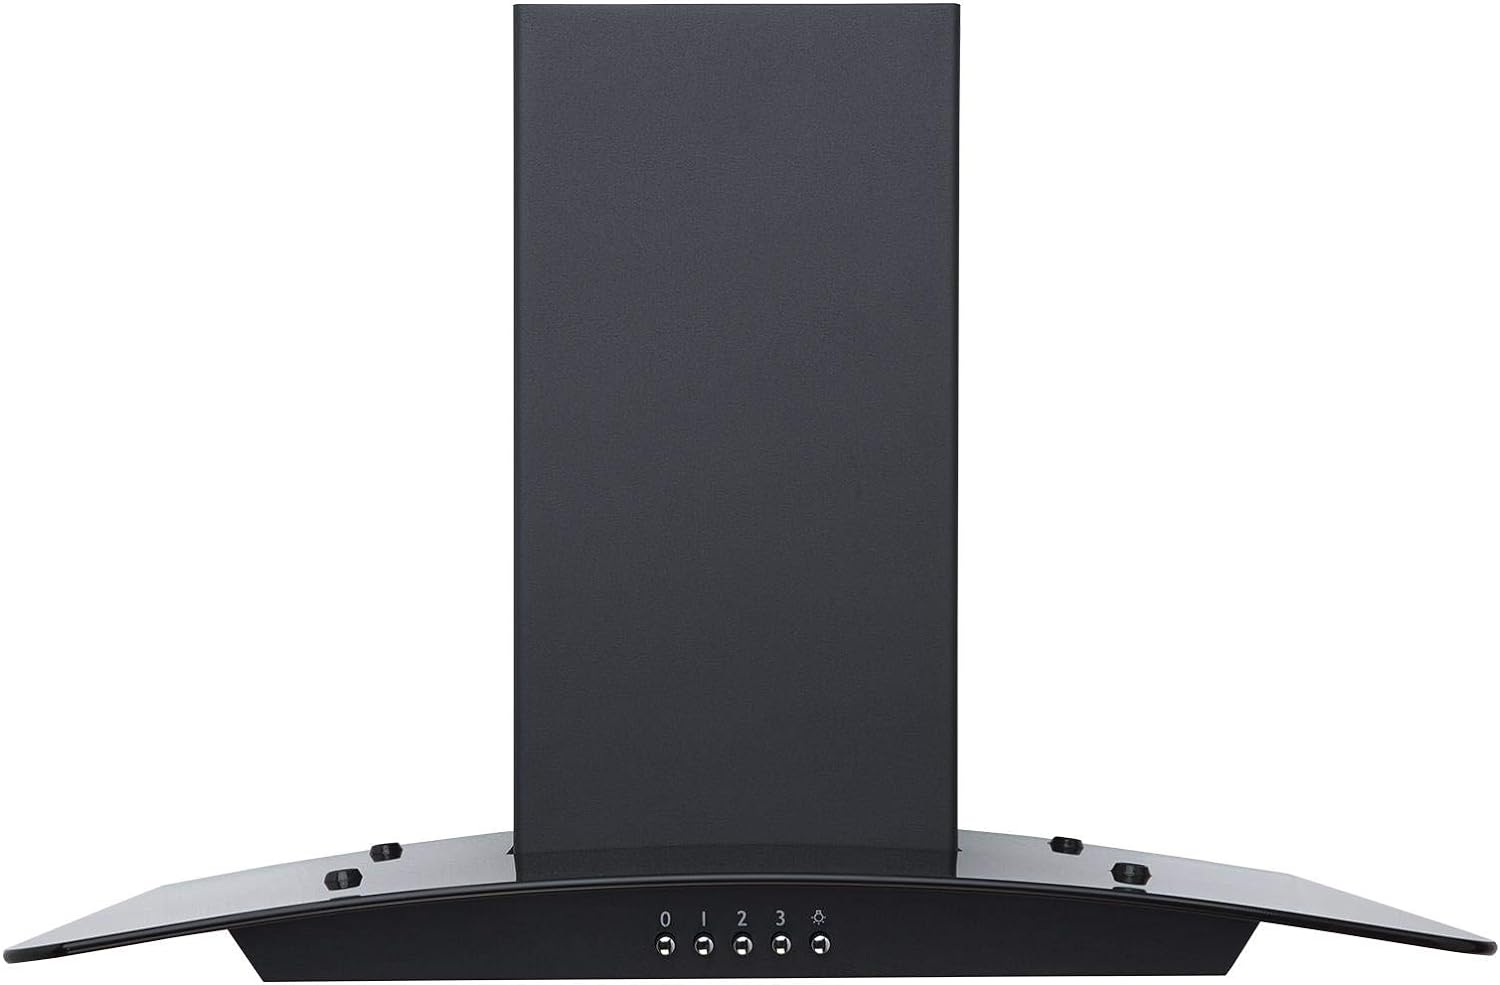 SIA CGHS60BL 60cm Curved Black Glass Cooker Hood Kitchen Extractor Fan - Amazing Gadgets Outlet